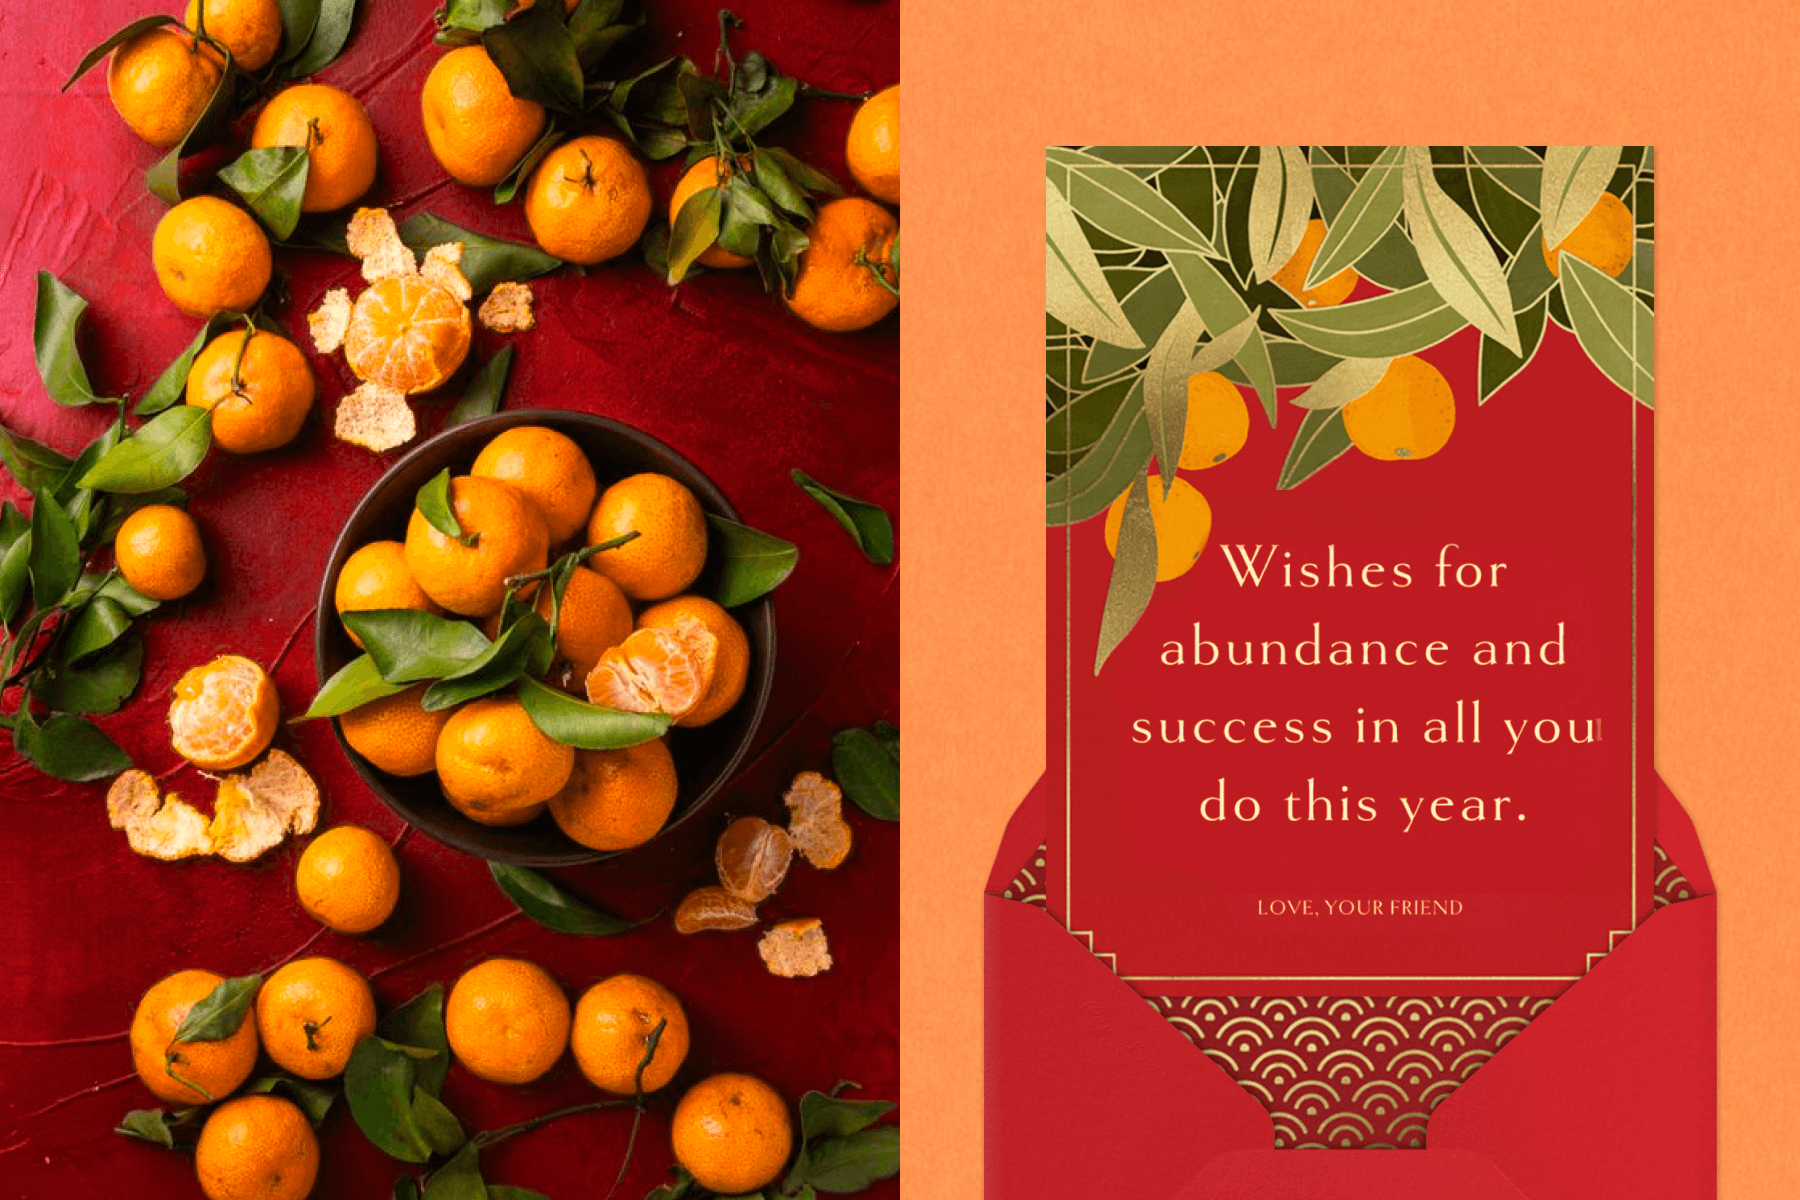 Many tangerines in and around a bowl; a red invitation with oranges and leaves on the top.